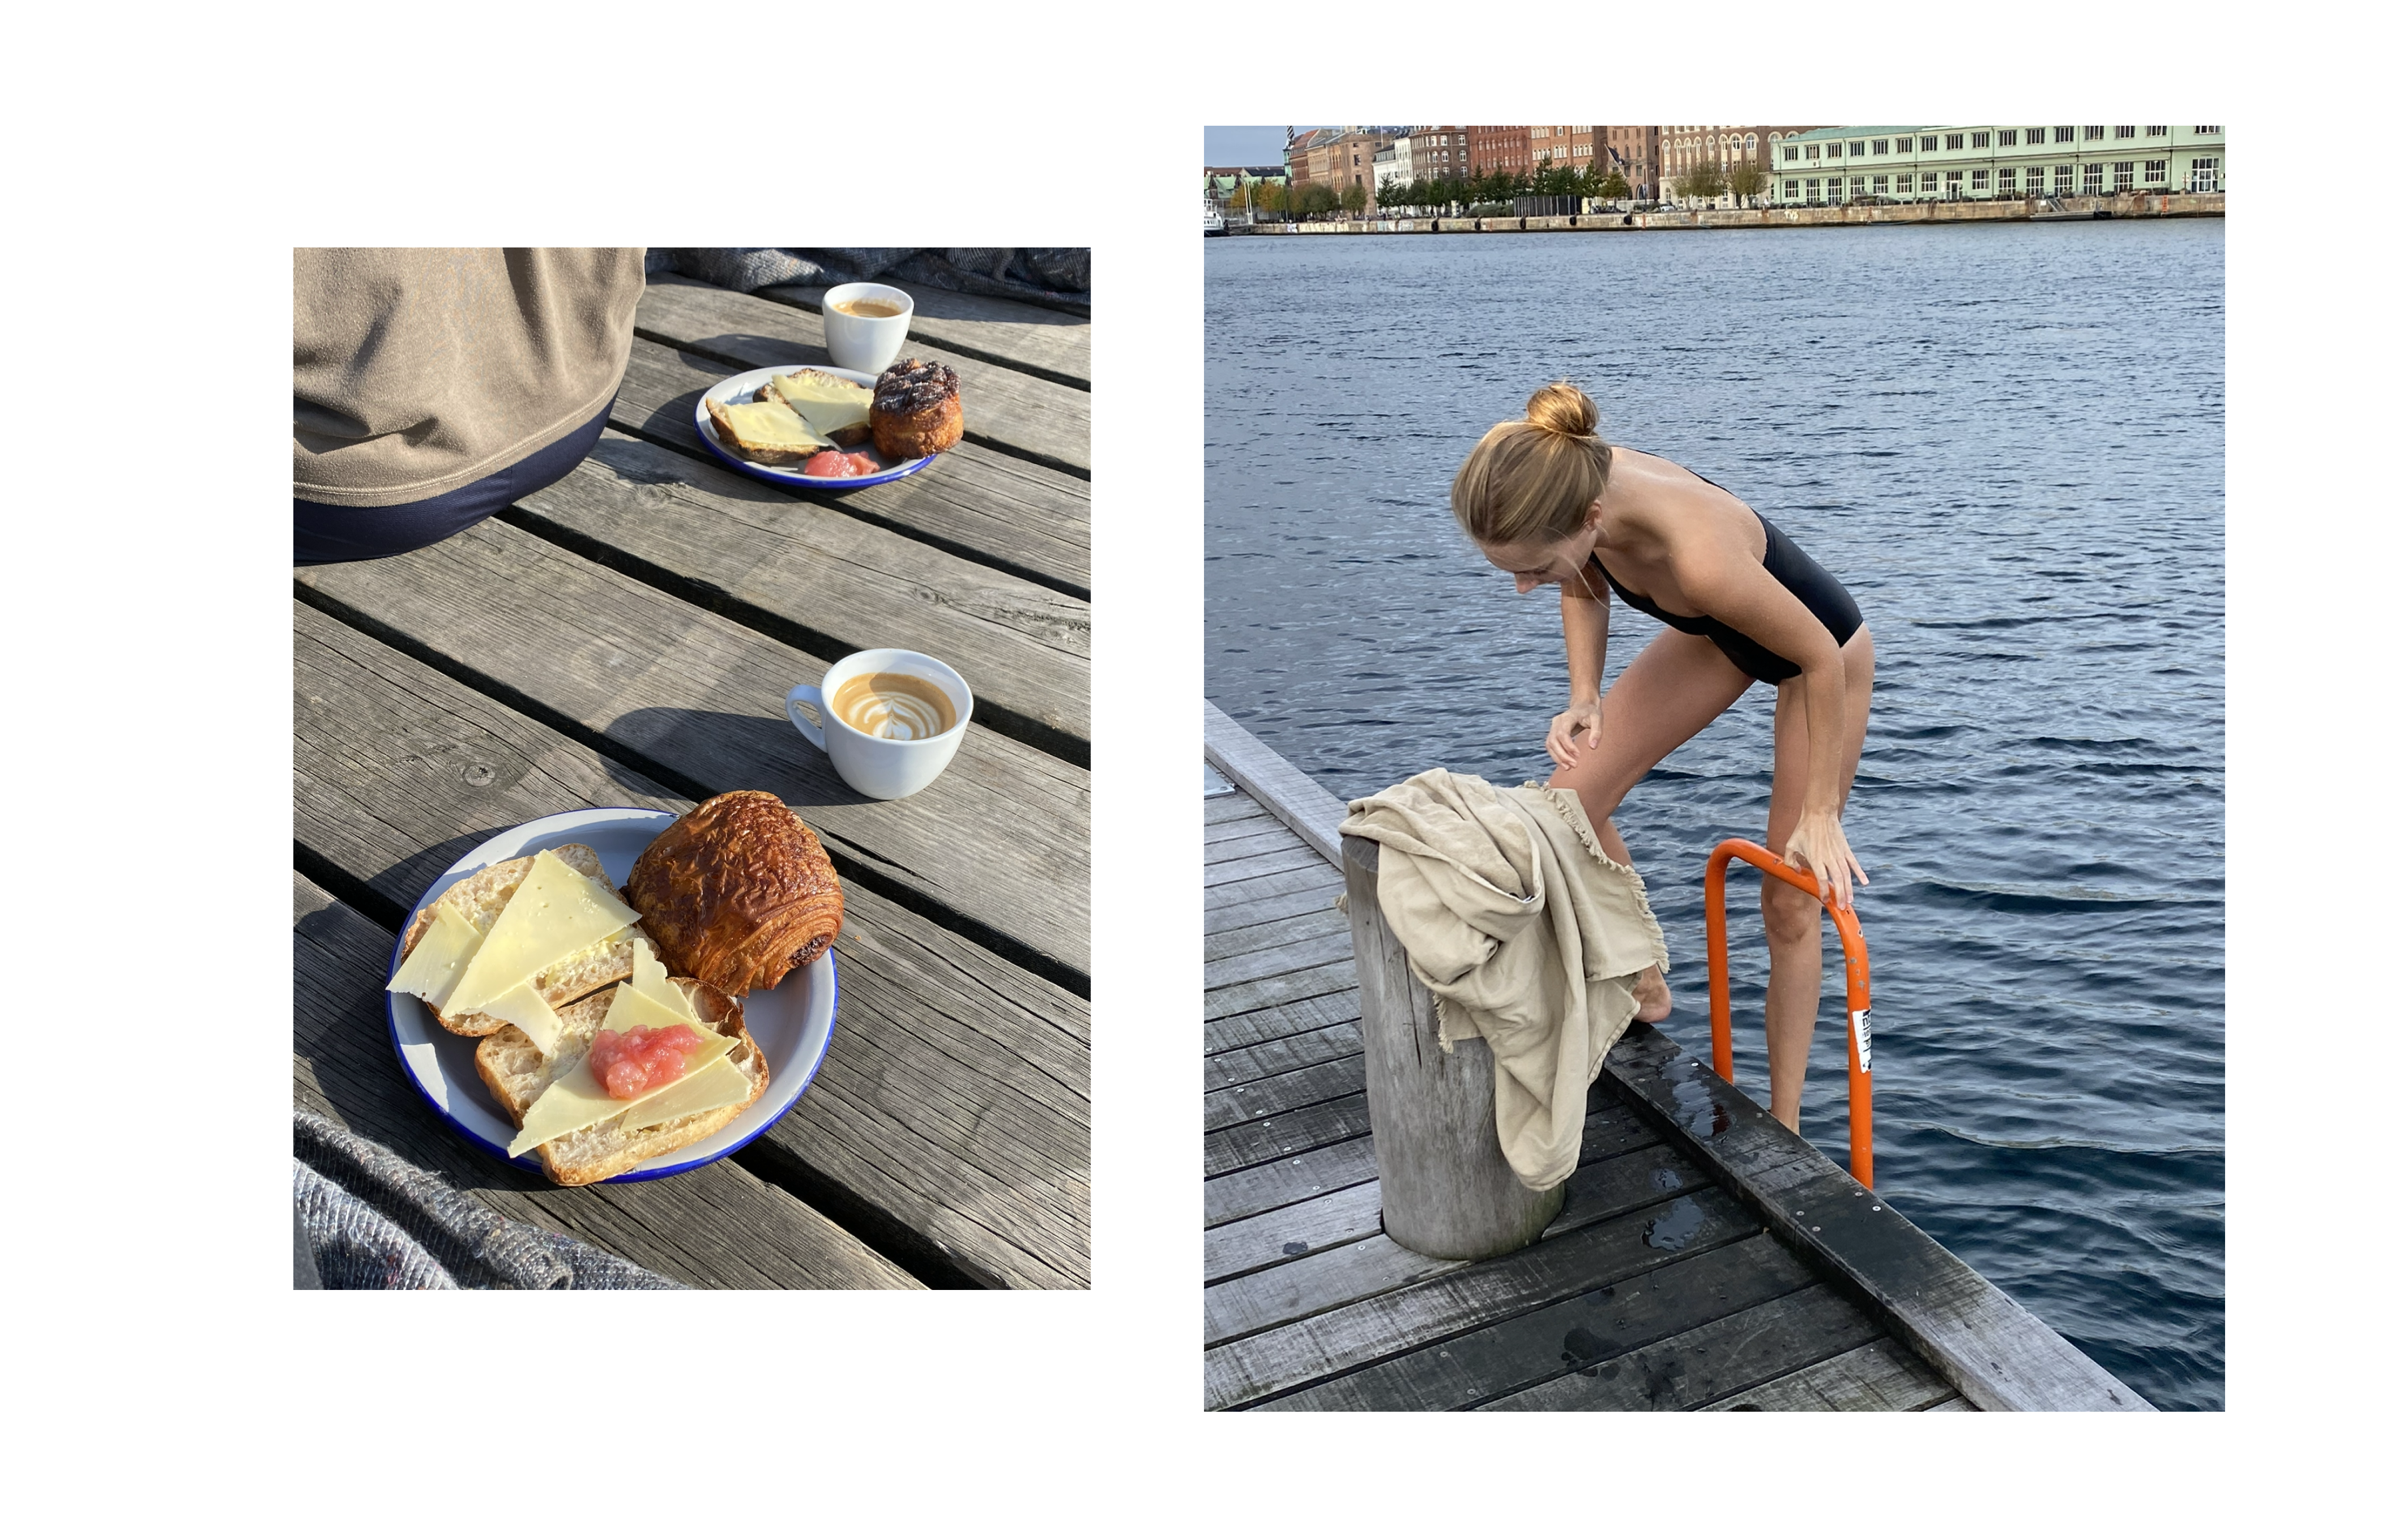 A morning dip in the canals and a sourdough bun - perfect as a sunday activity 